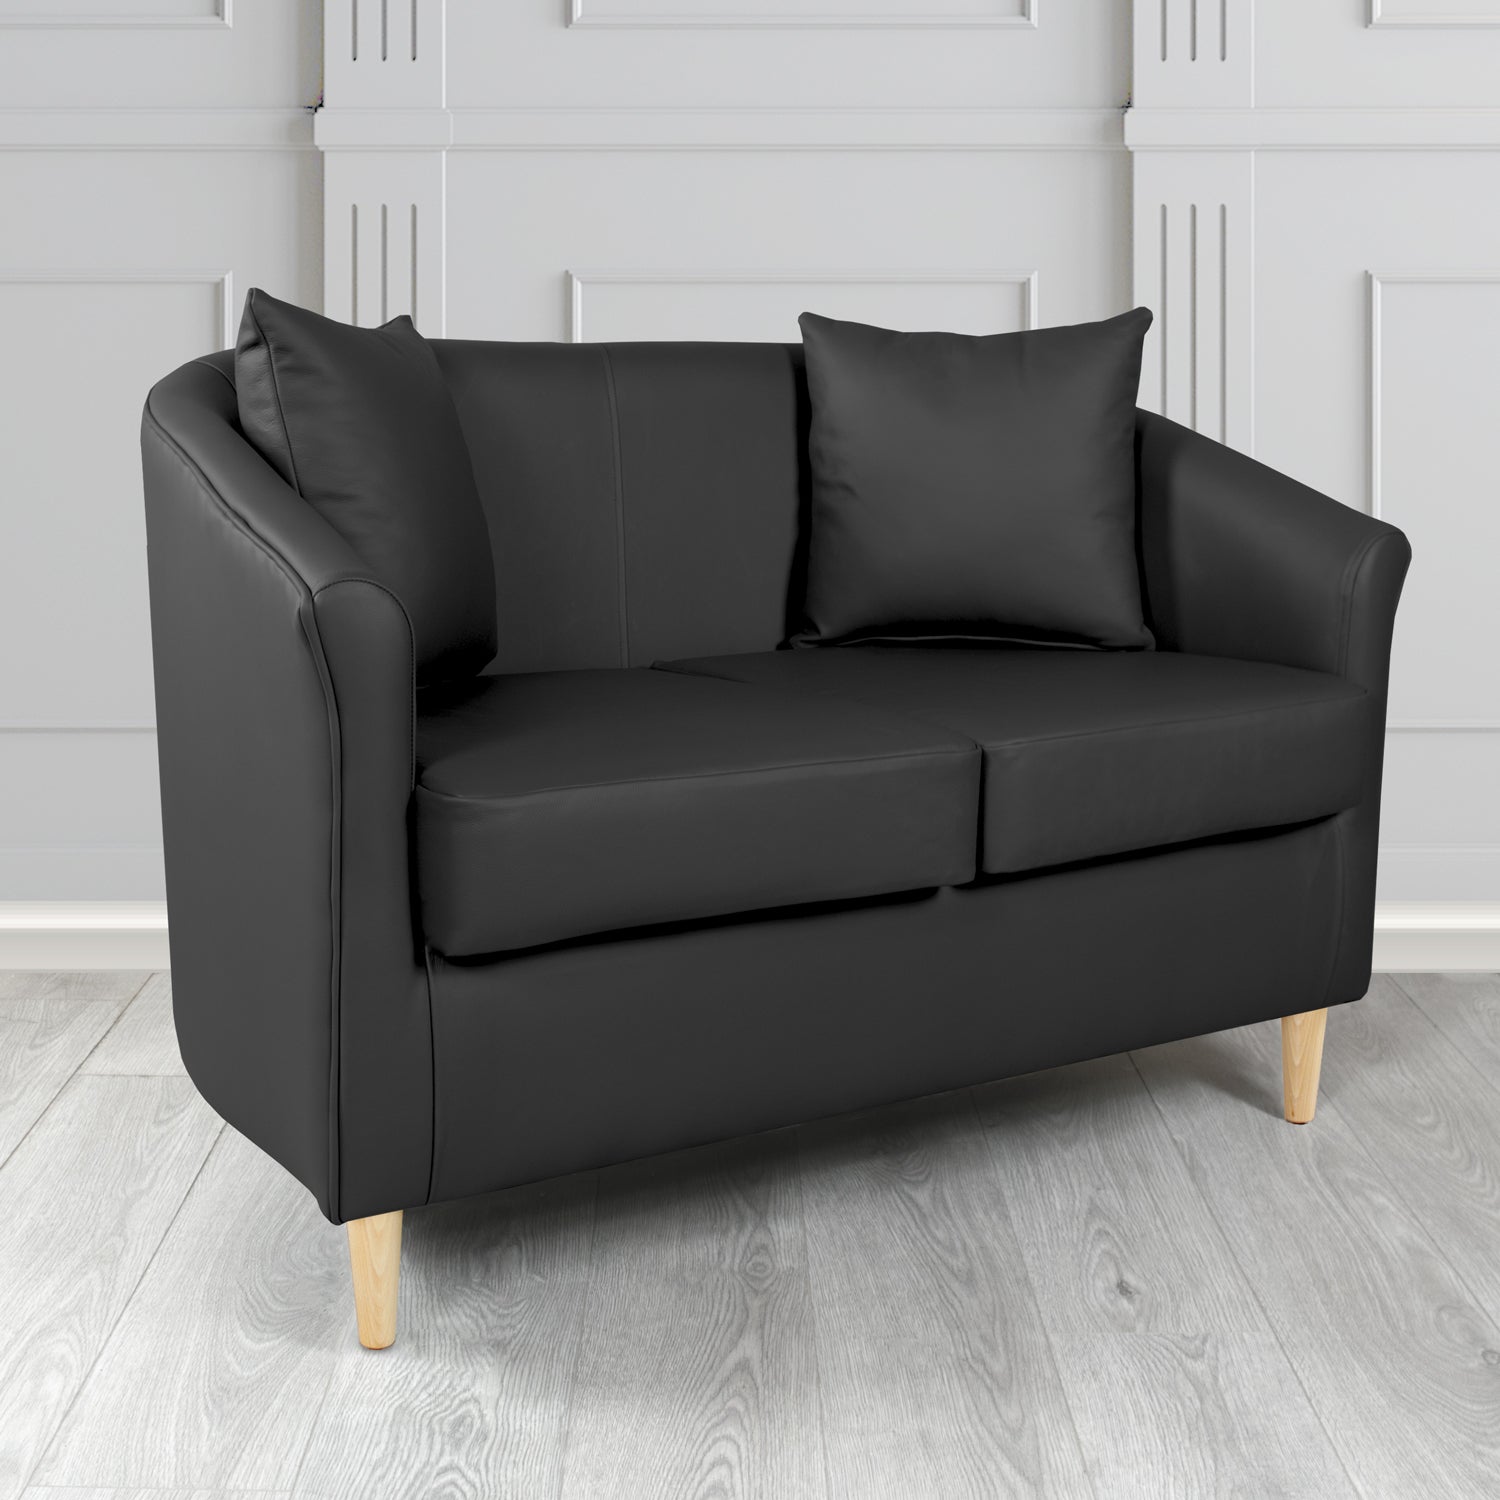 St Tropez 2 Seater Tub Sofa in Madrid Black Faux Leather